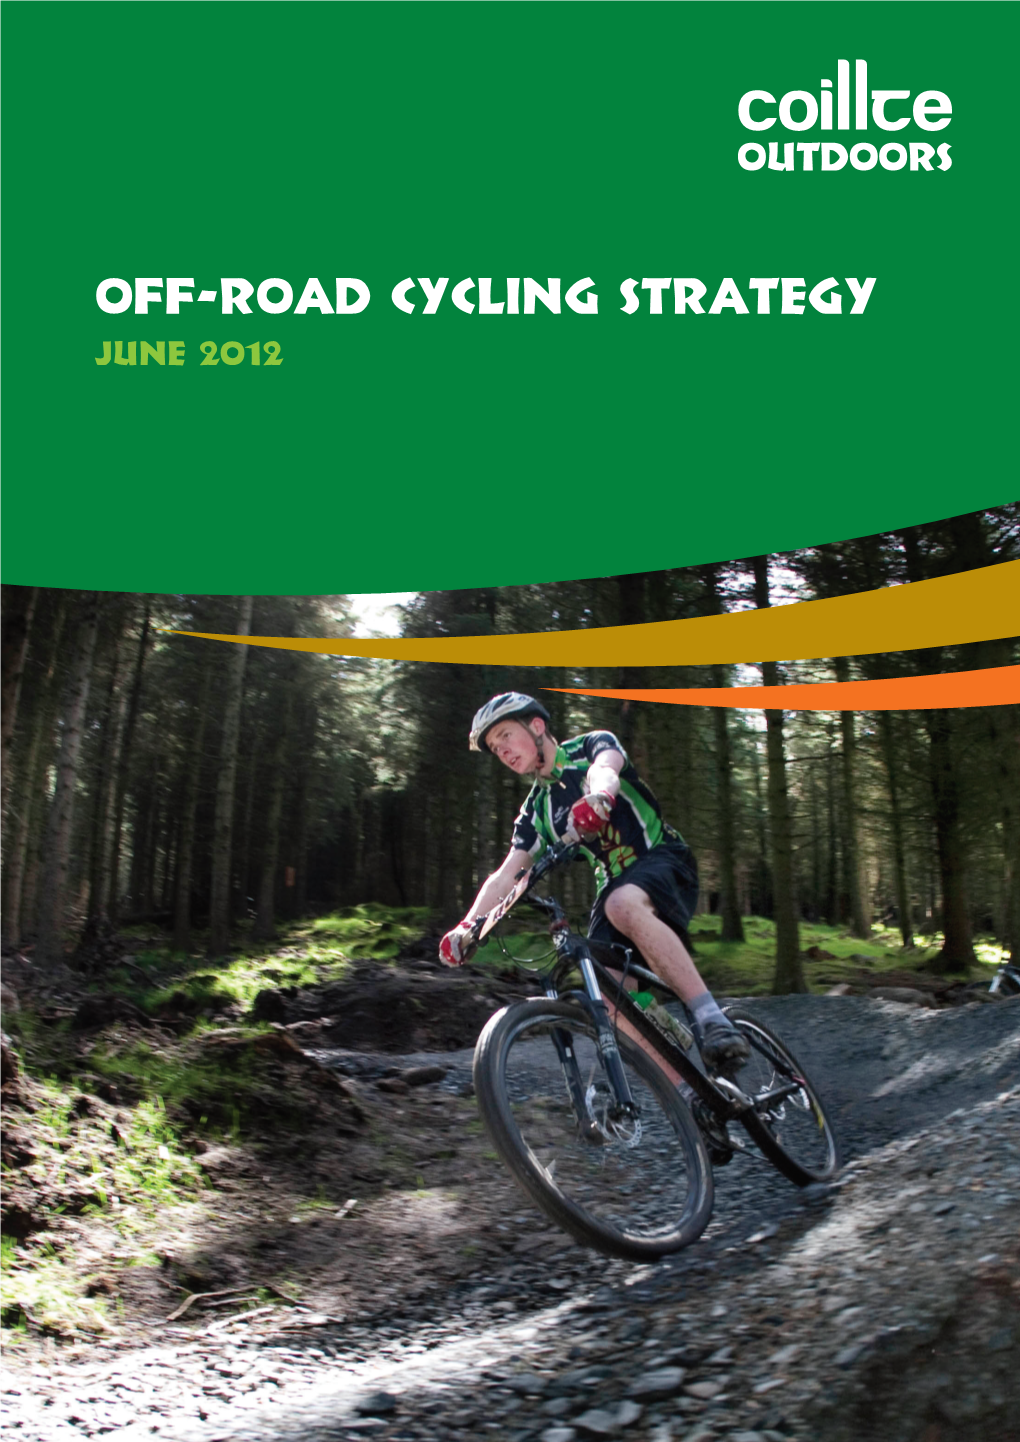 Off-Road Cycling Strategy June 2012 Executive Summary